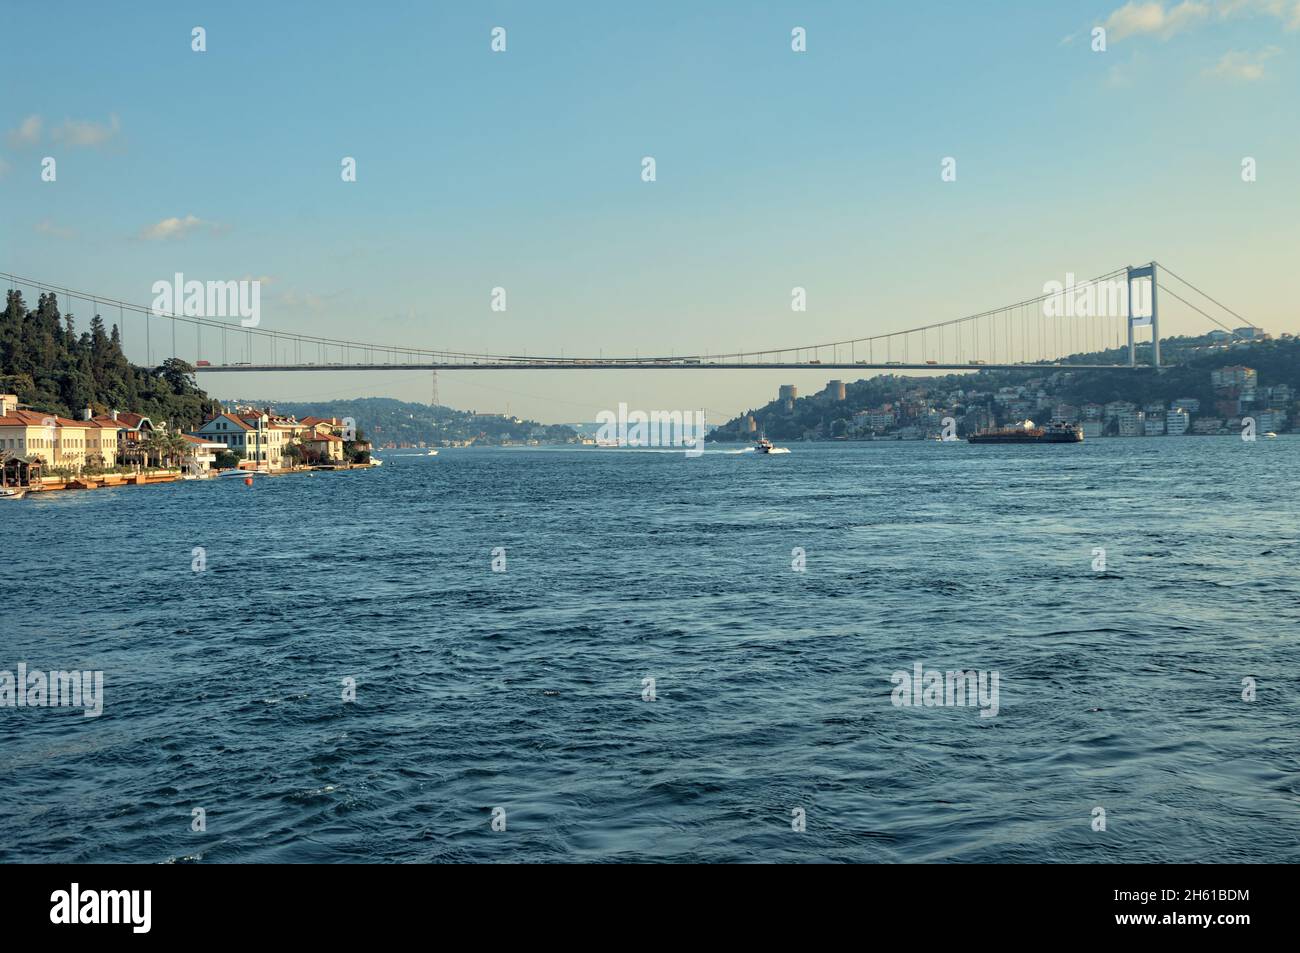 transport of Turkey in Istanbul, Bosphorus Strait or Bosporus with its suspension bridge the first to connect the two continents of Europe and Asia Stock Photo